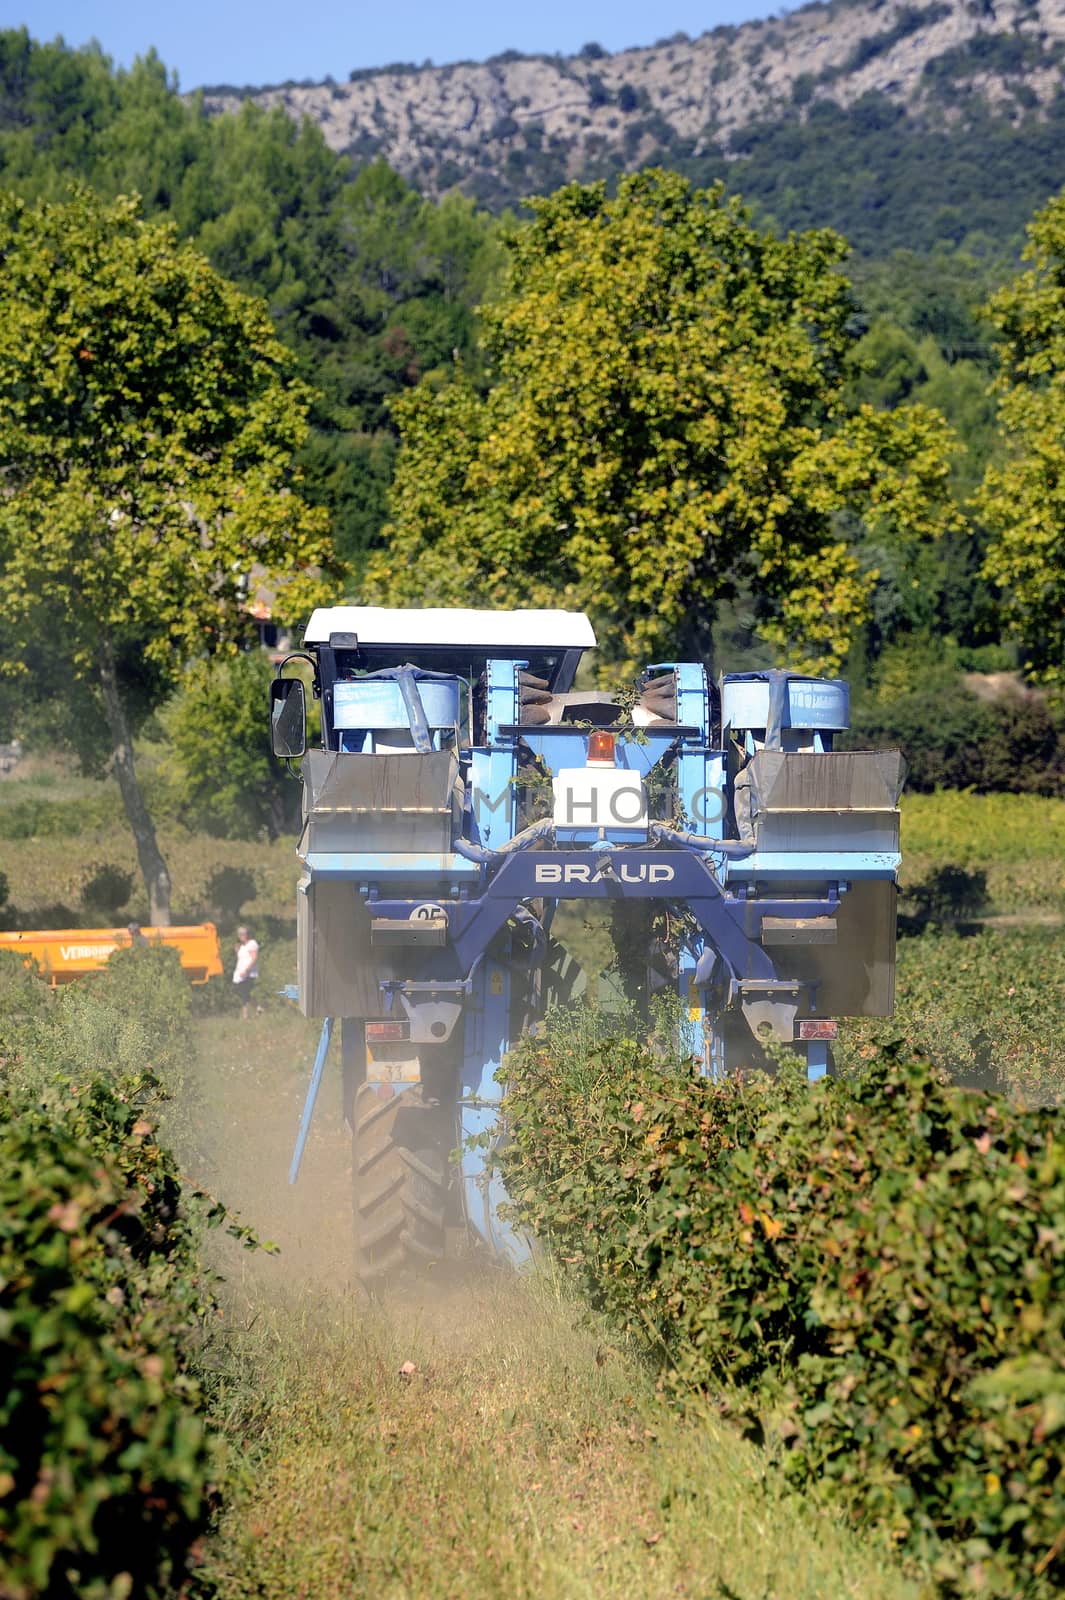 The harvest with machines to harvest the grapes in France in the department of Gard.